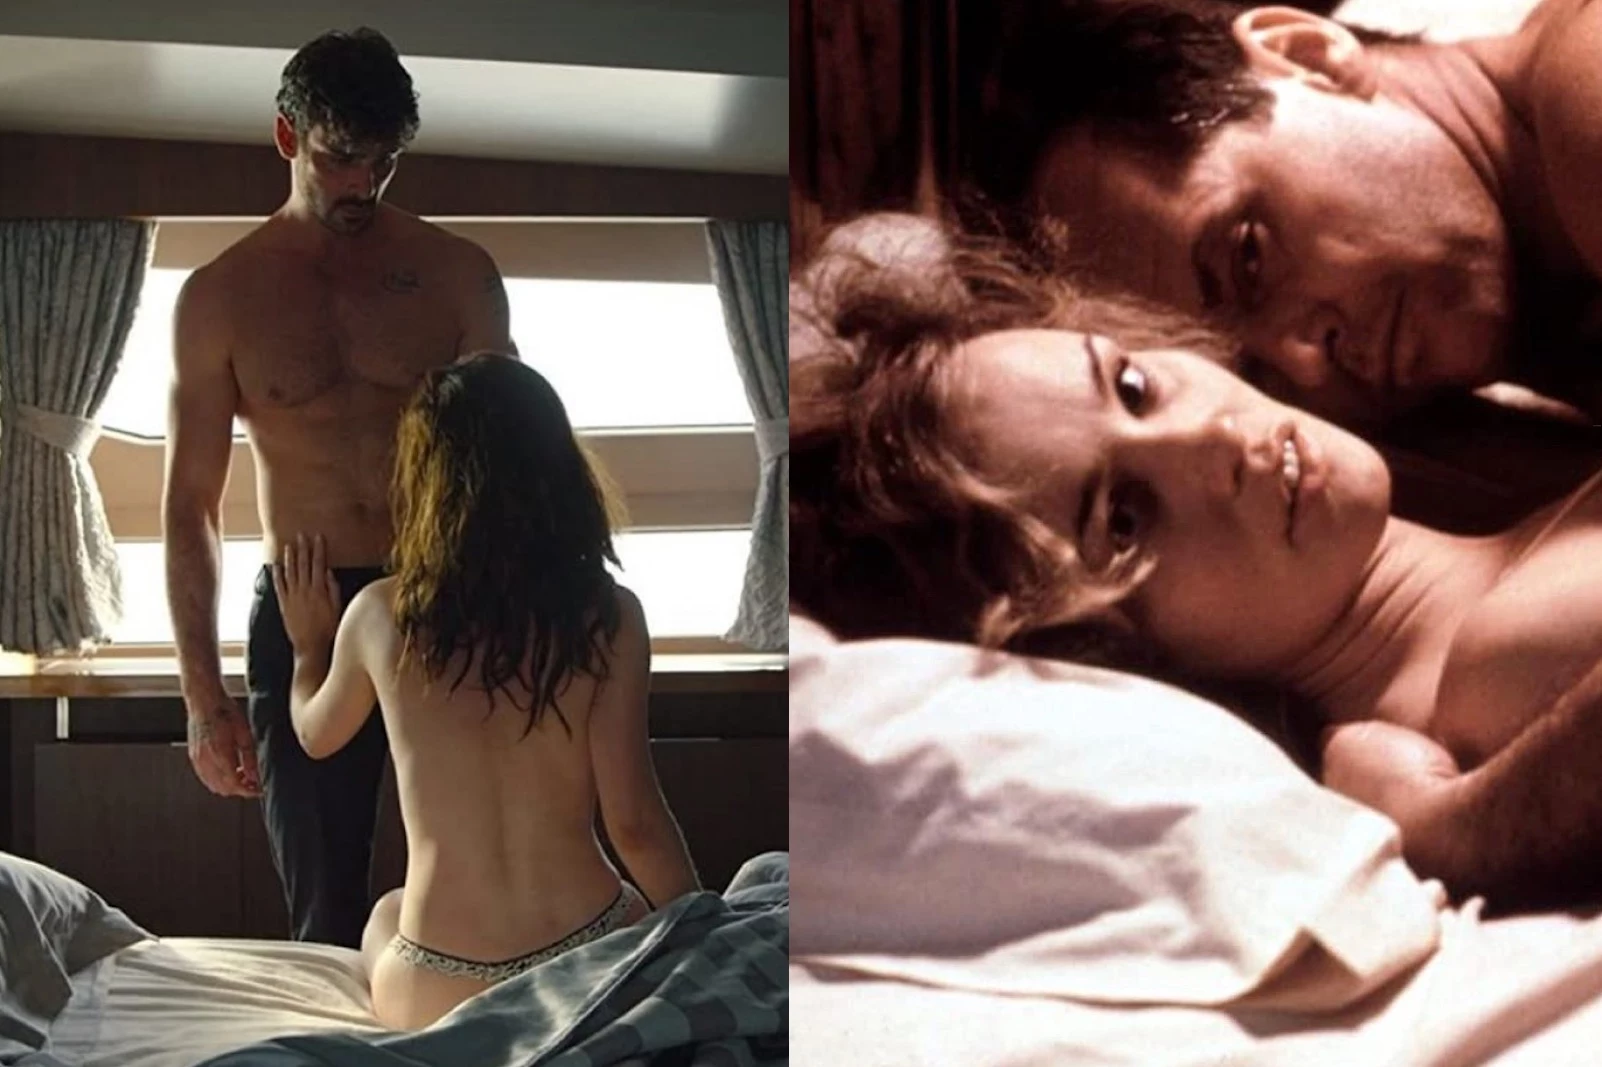 Why would movie actors do insimulated sex scenes